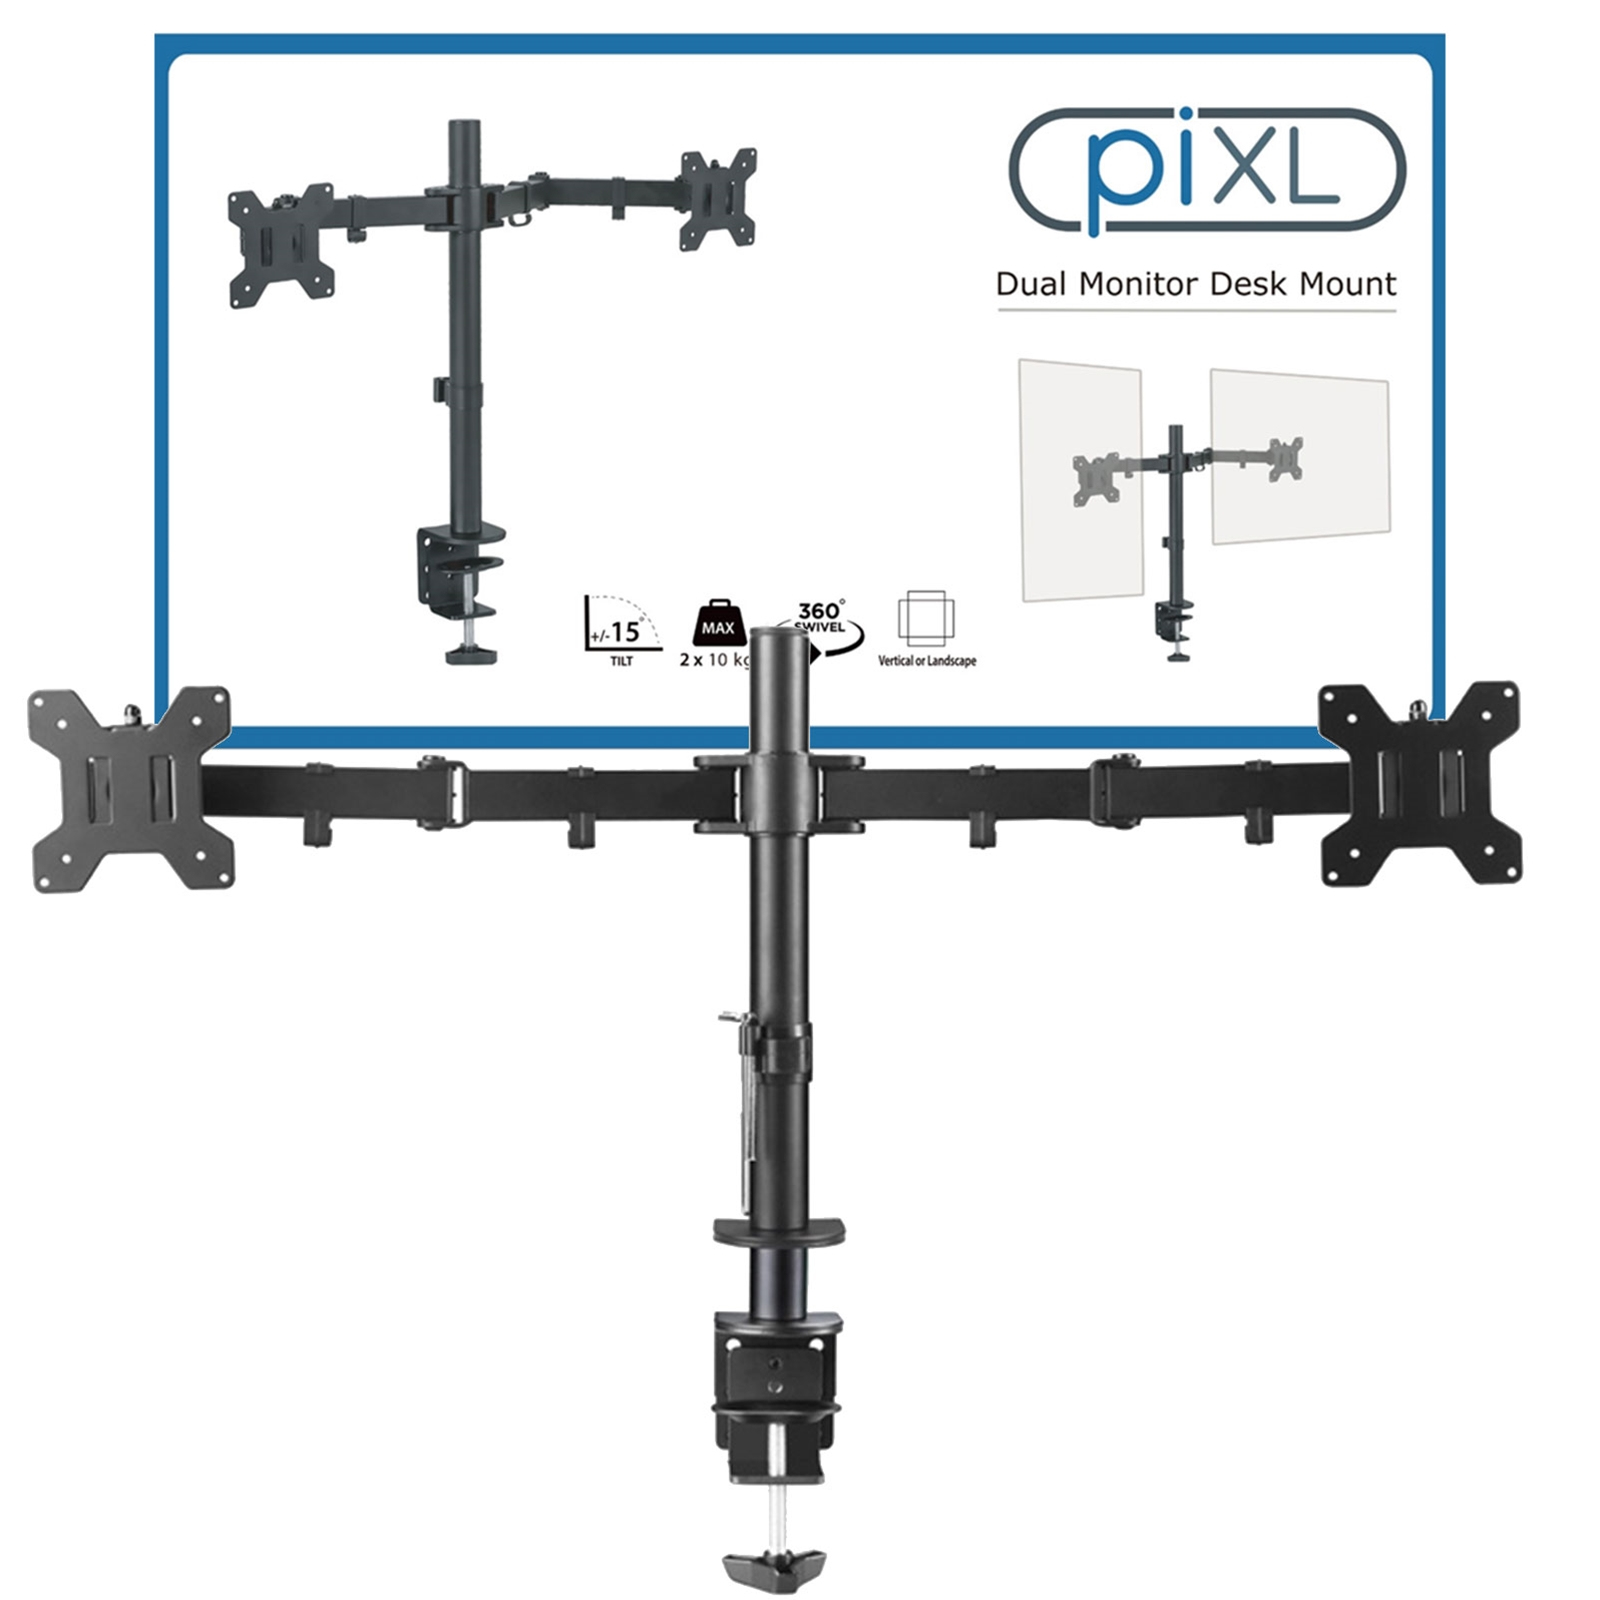 DOUBLE ARM PIXL Double Monitor Arm, For Upto 2x 27 inch Monitors, Desk Mounted, VESA dimensions of 75x75mm or 100x100mm, 180 Degrees Swivel, 15 Degrees Tilt, Weight Upto 10kg per screen, Built in Cable Management